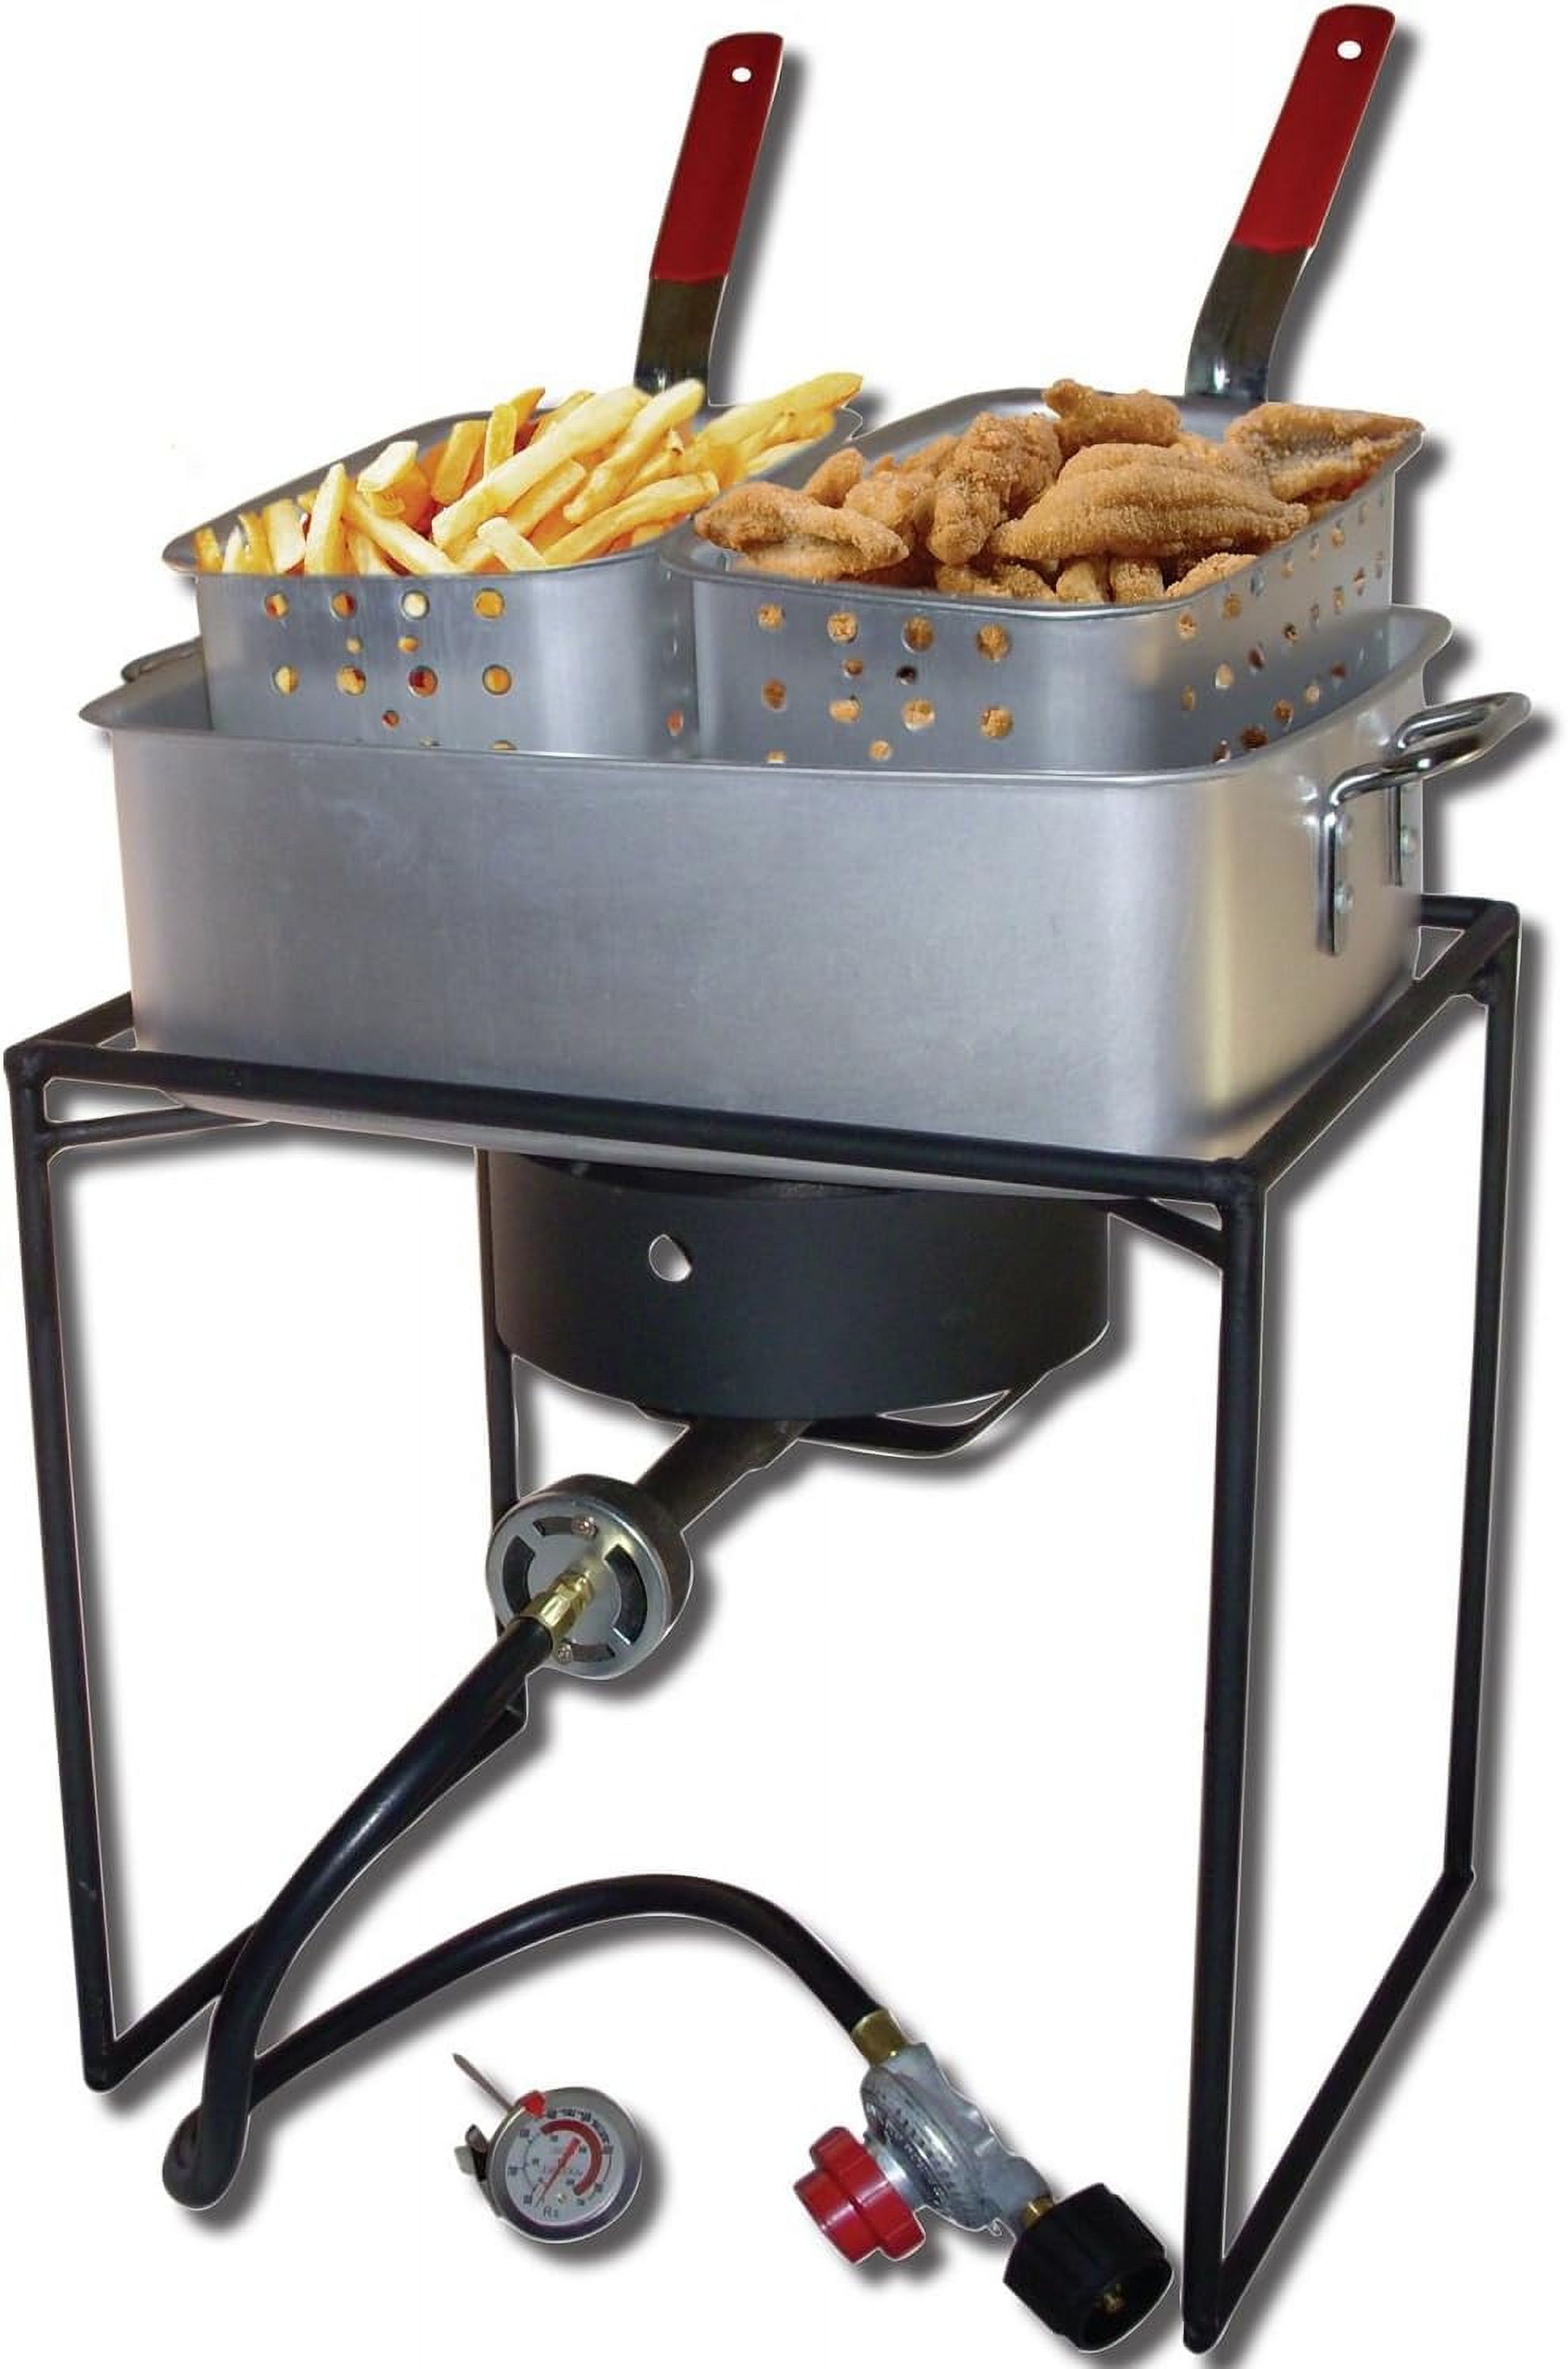 King Kooker Portable 16″ Propane Stove Burner Deep Fryer for Outdoor Cooking with 2 Frying Baskets - image 1 of 9